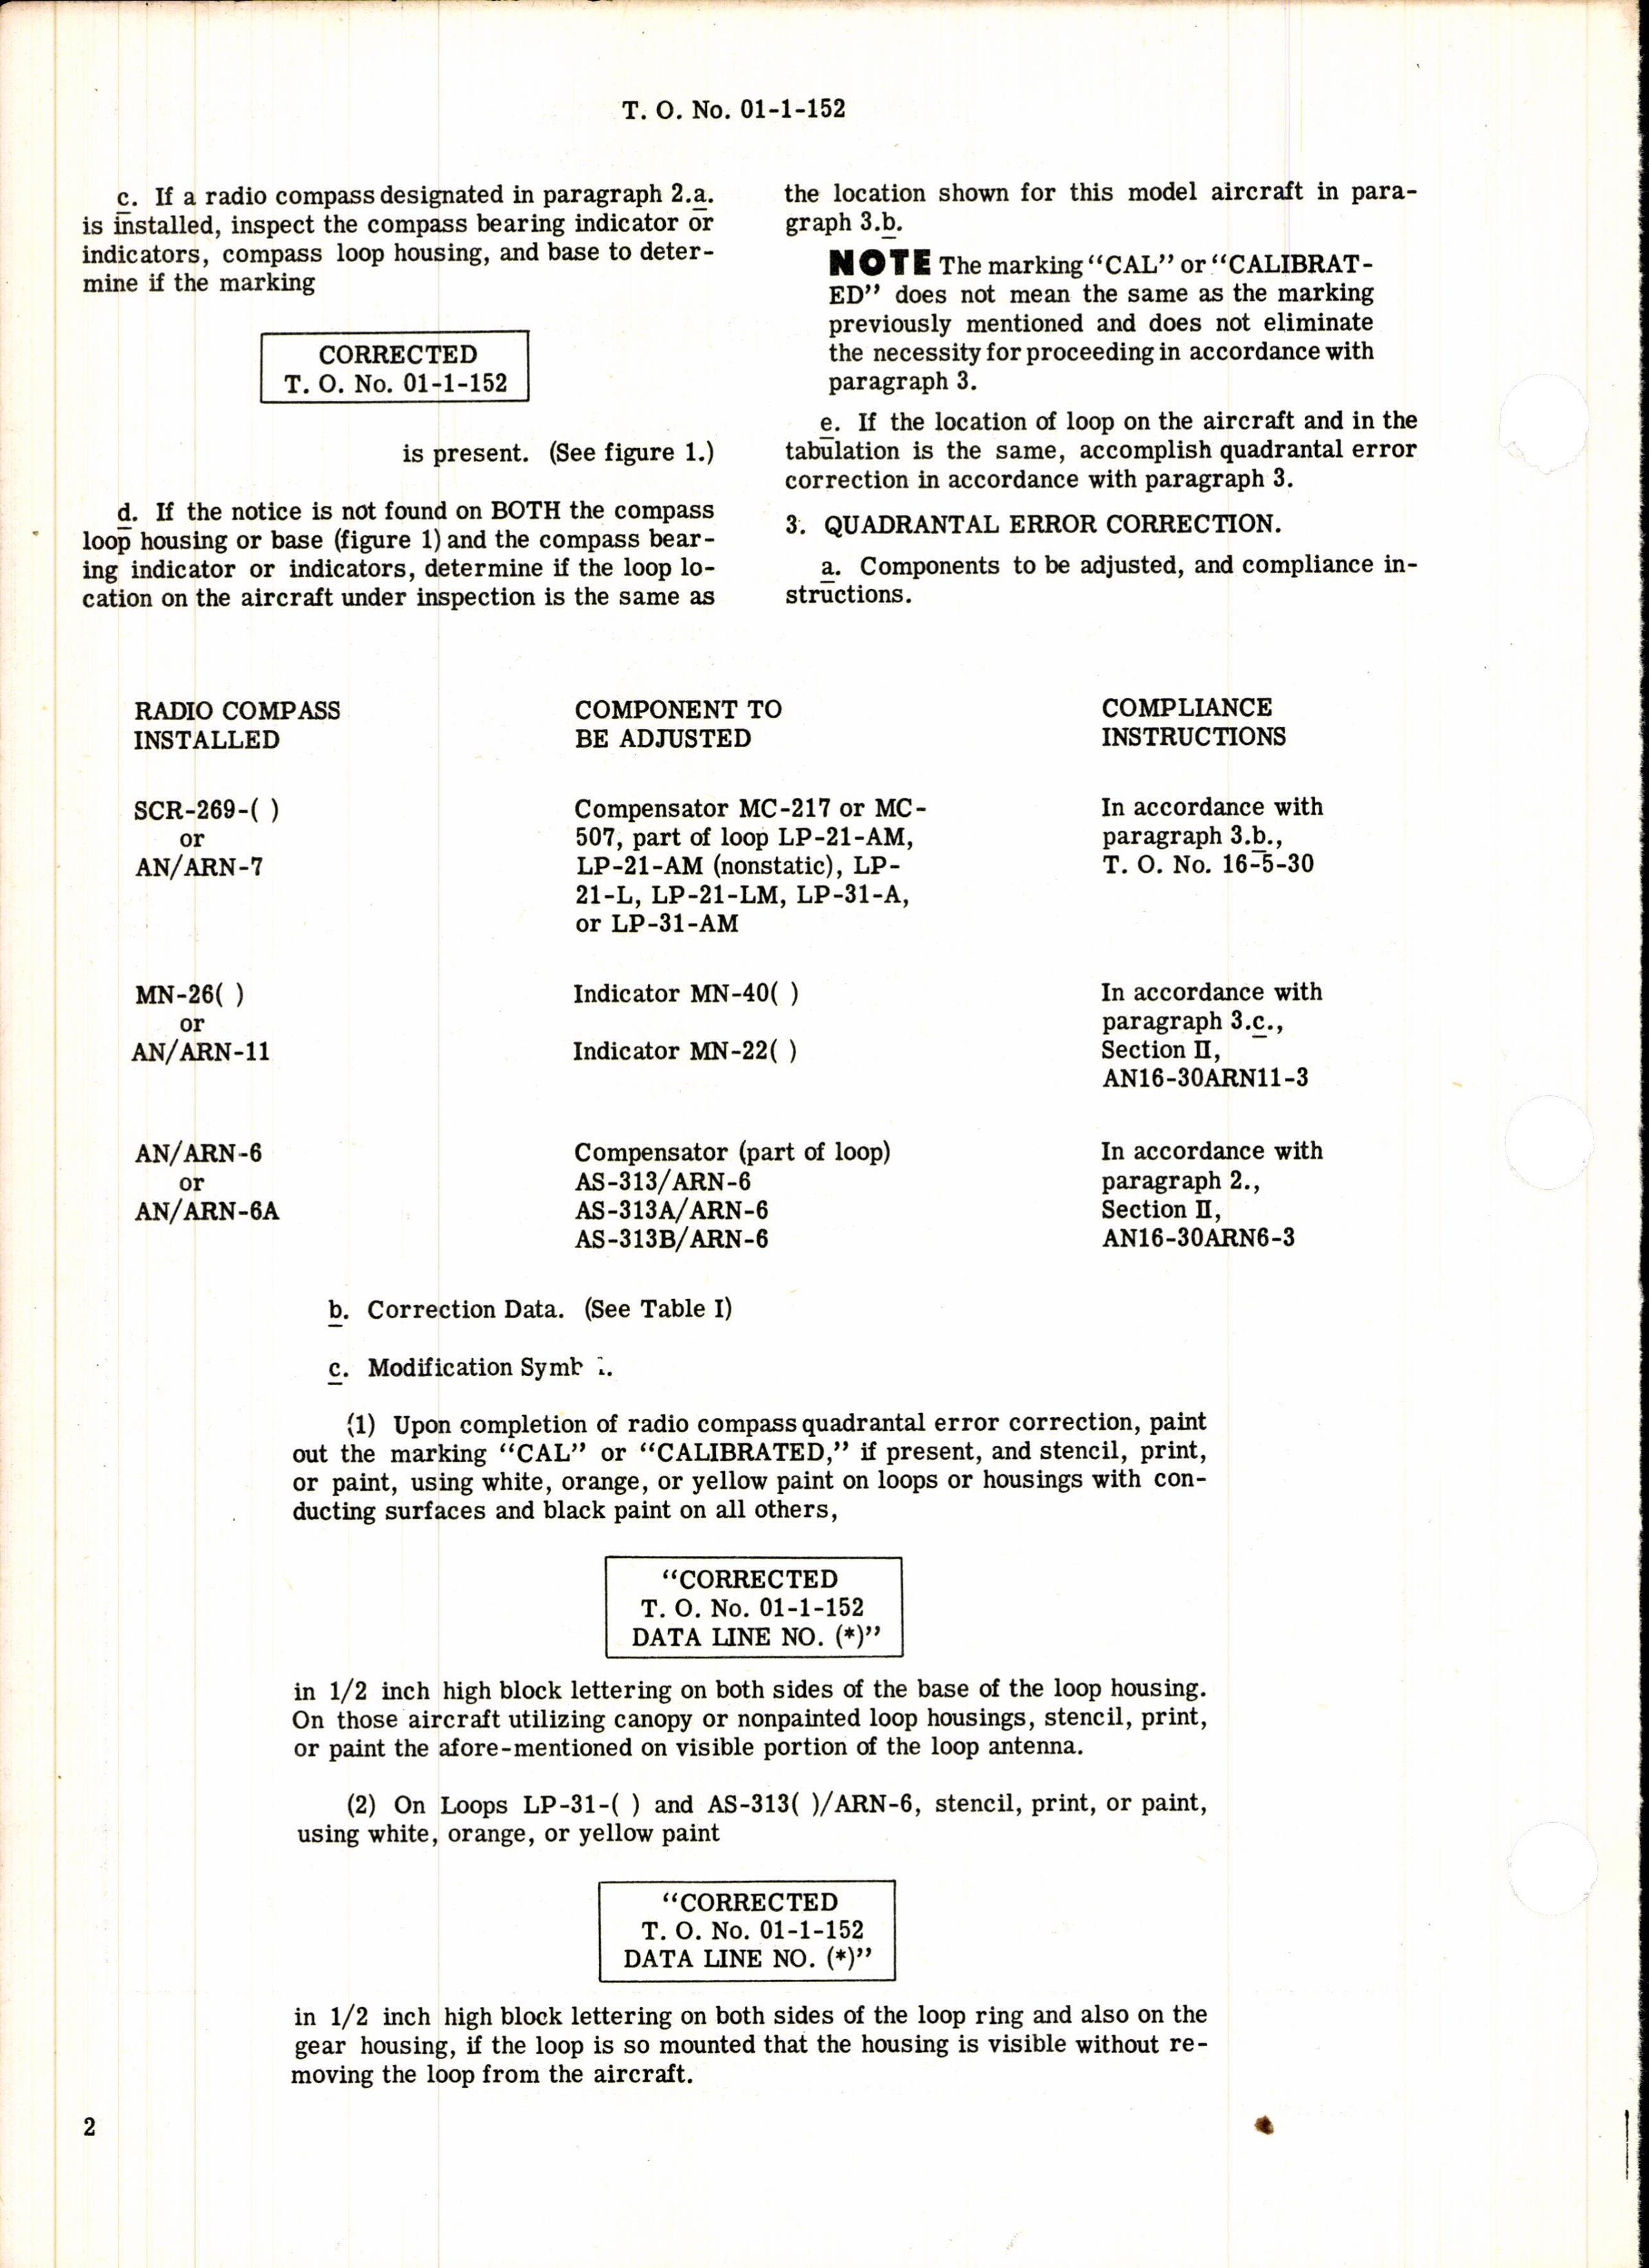 Sample page 2 from AirCorps Library document: Radio Compass Quadrantal Error Correction